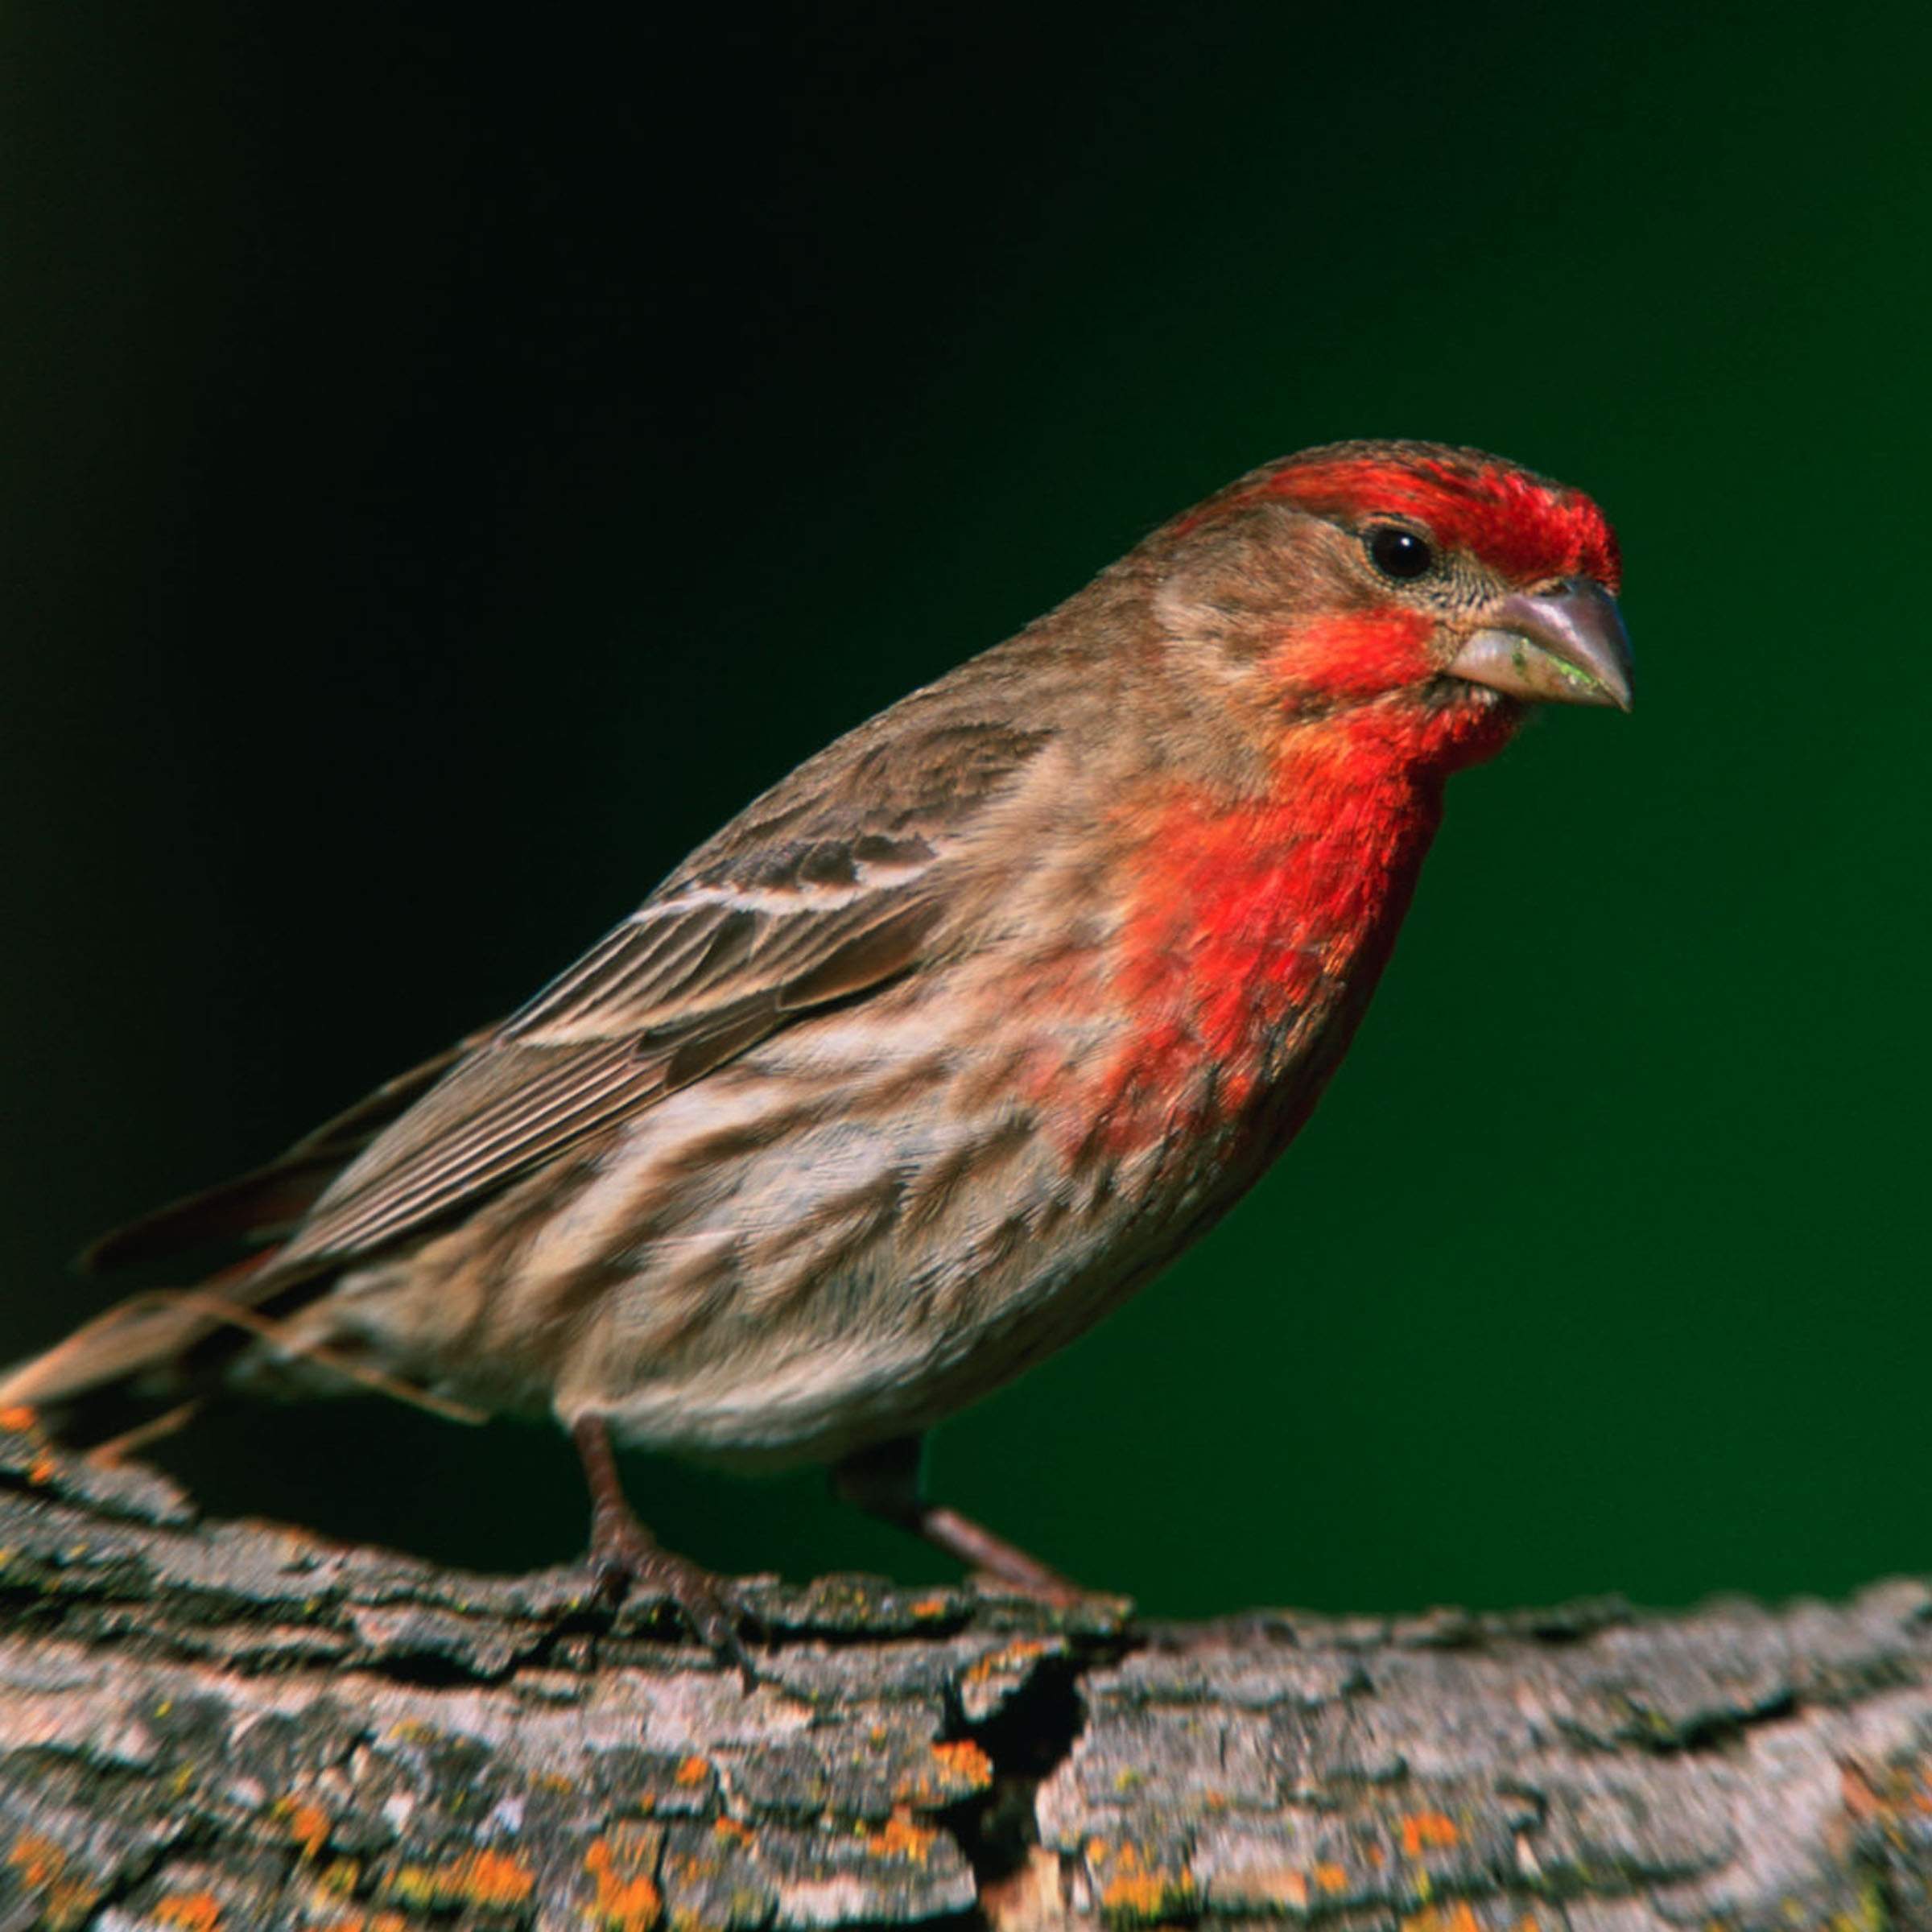 Male House Finch in Mating Plumage, Haemorhous mexicanus, Courtesy US FWS Gary Kramer, Photographer